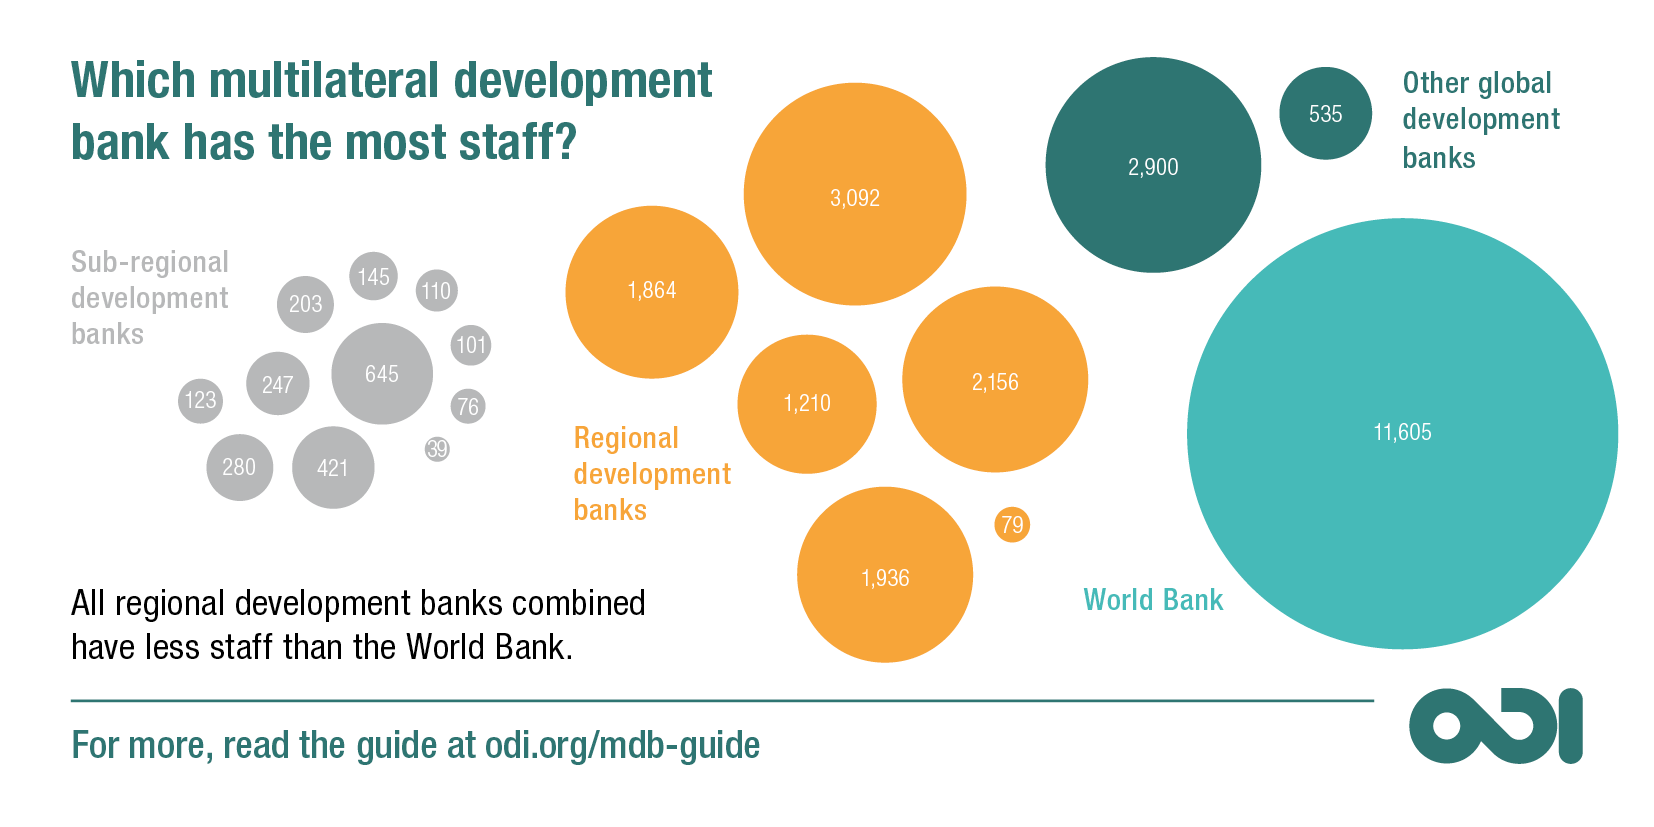 Which multilateral development bank has the most staff?